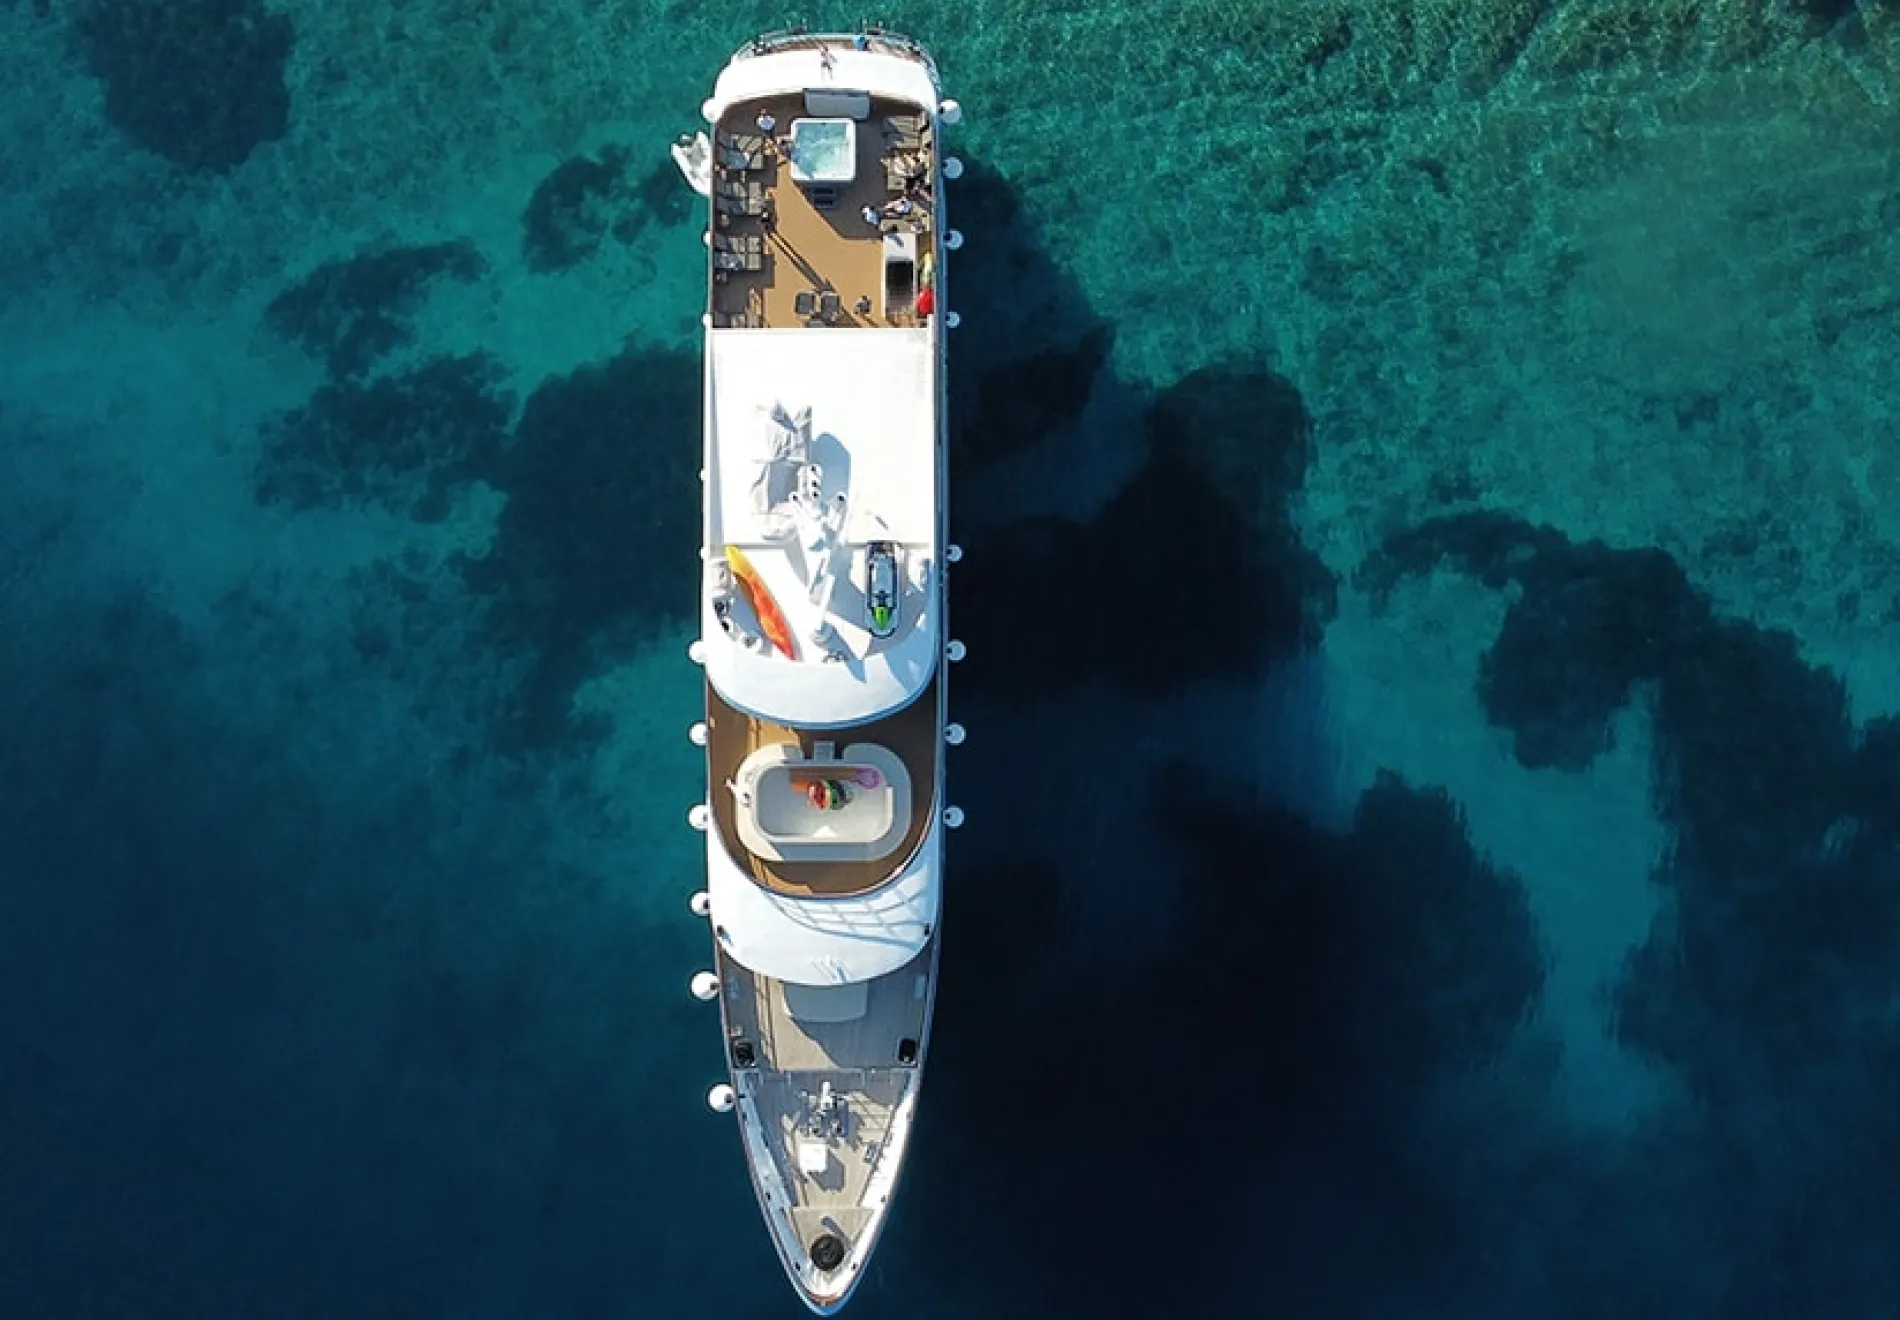 THE BIRTH OF A NEW YACHTING INDUSTRY IN CROATIA